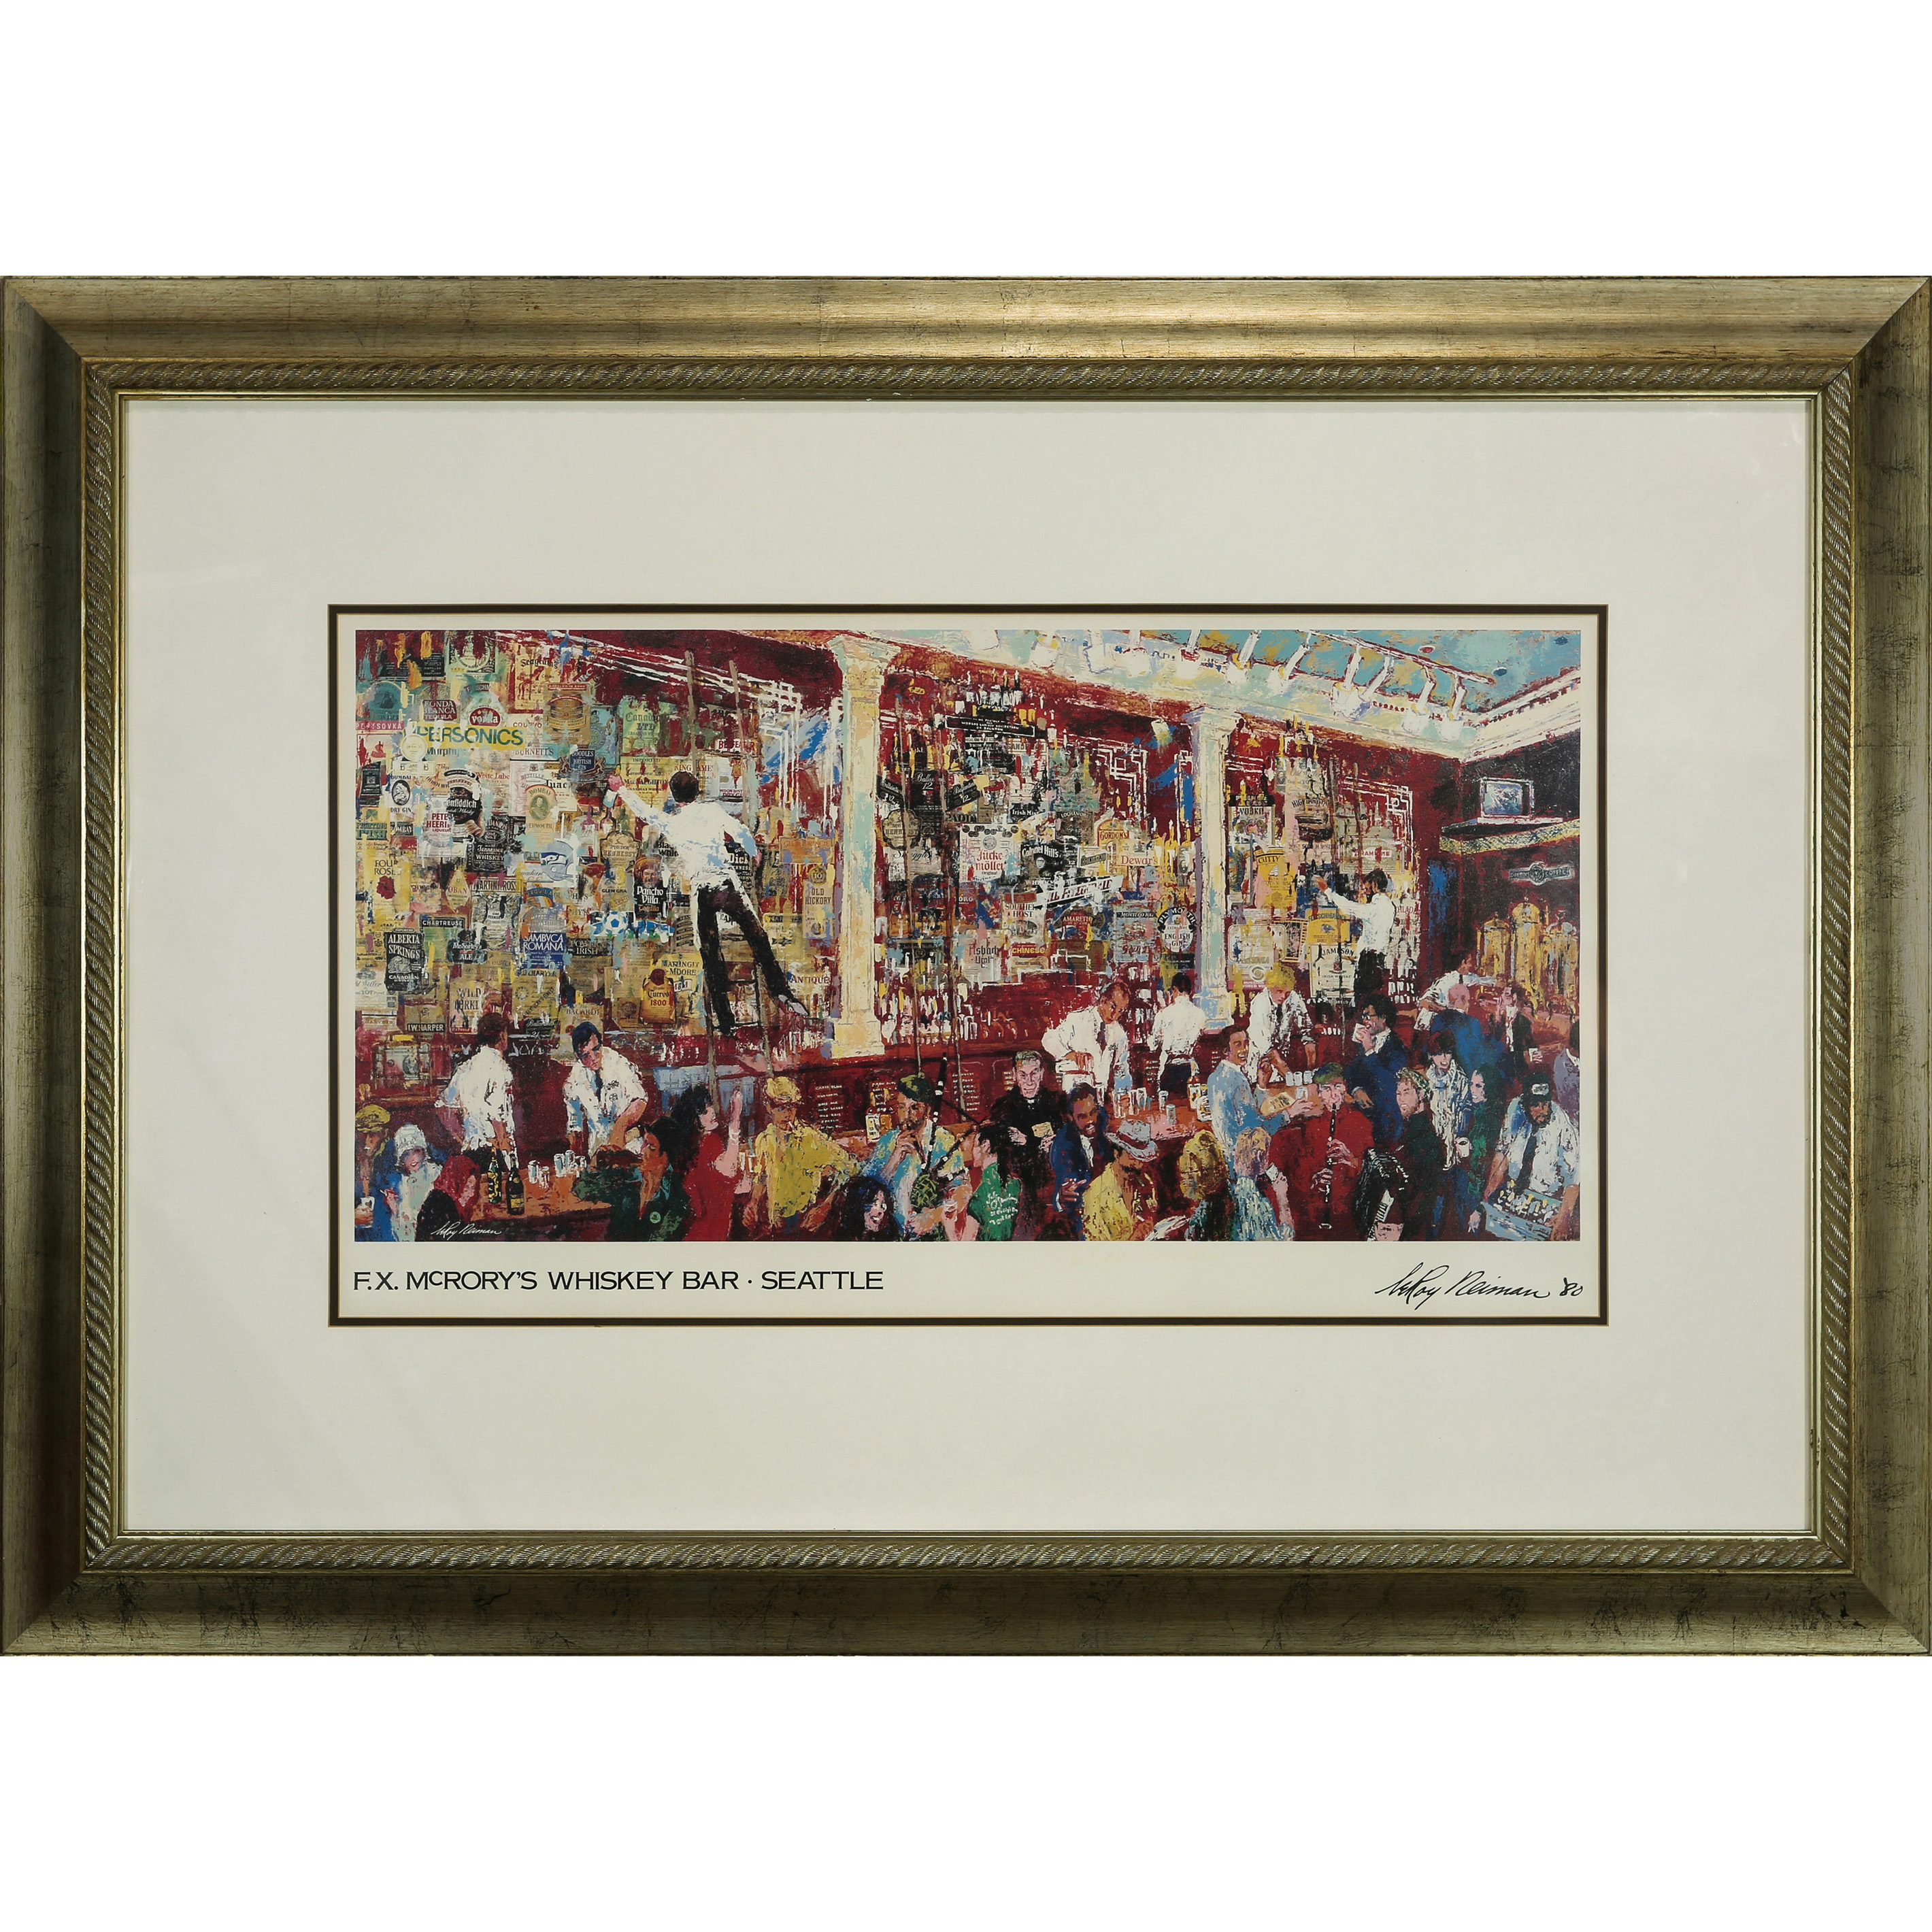 PRINT, AFTER LEROY NEIMAN After